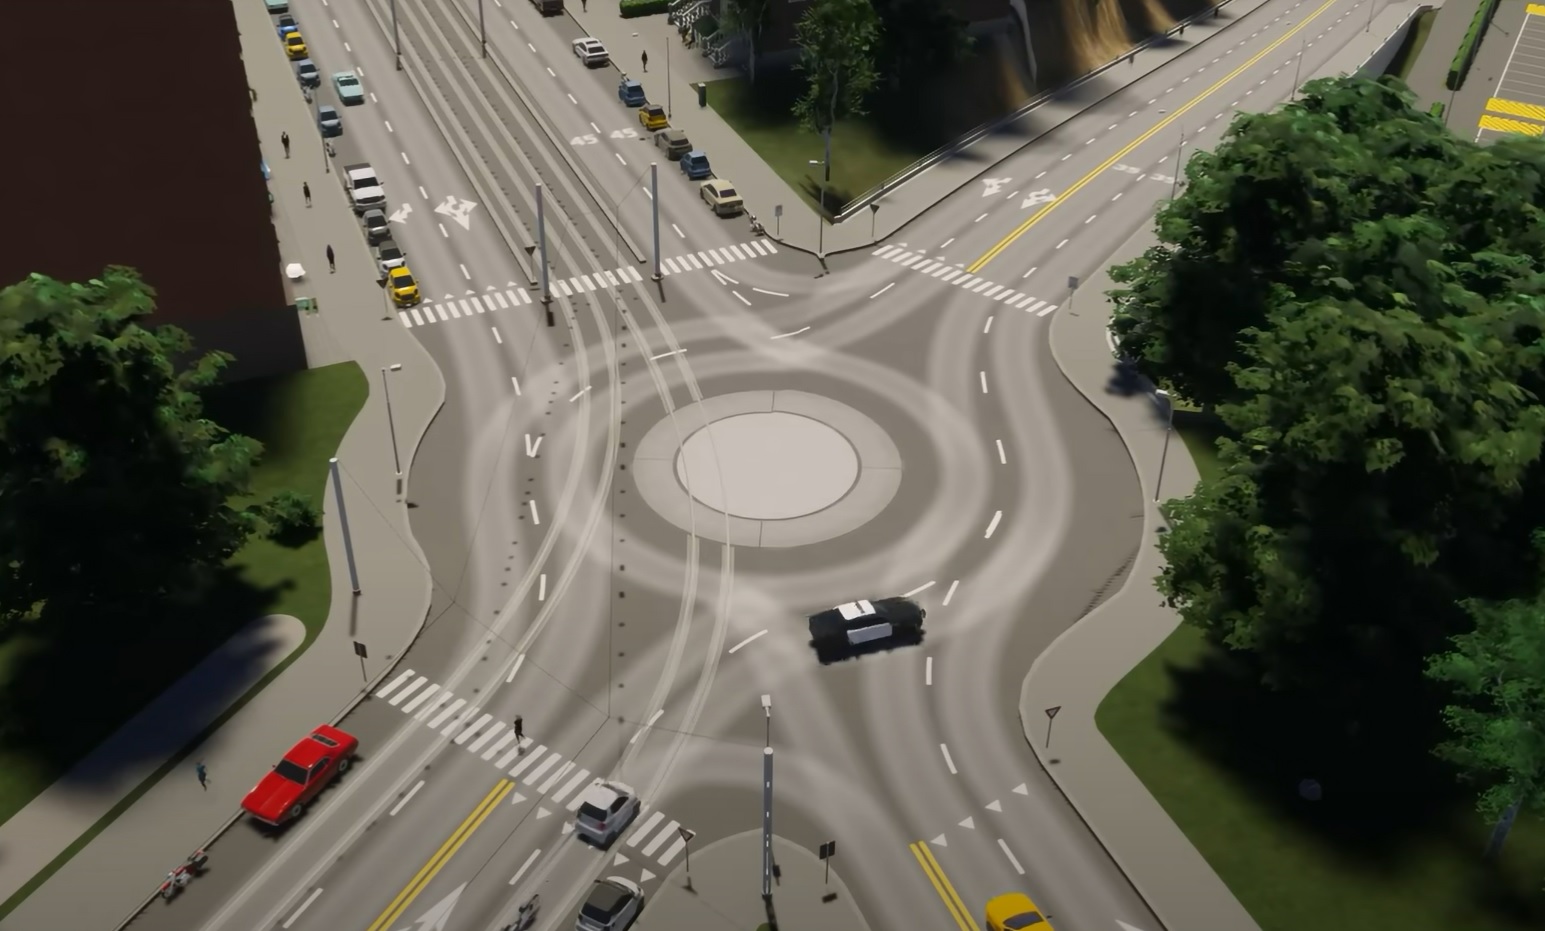 Cities Skylines 2 roads and accidents: An image of a roundabout from city-building game Cities Skylines 2